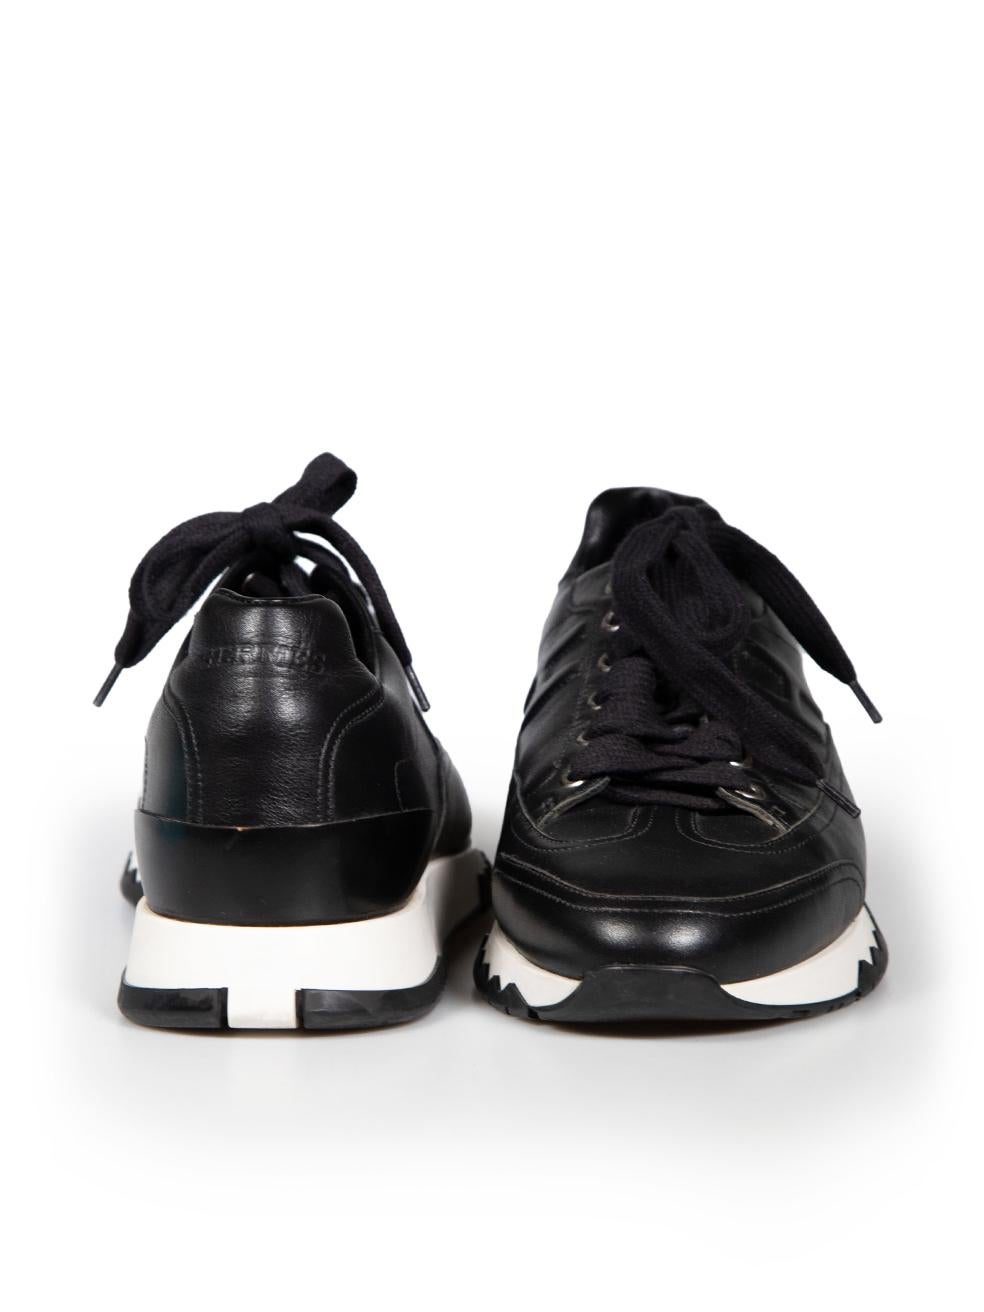 Hermès Black Leather Trail Lace Up Trainers Size IT 38.5 In Good Condition For Sale In London, GB